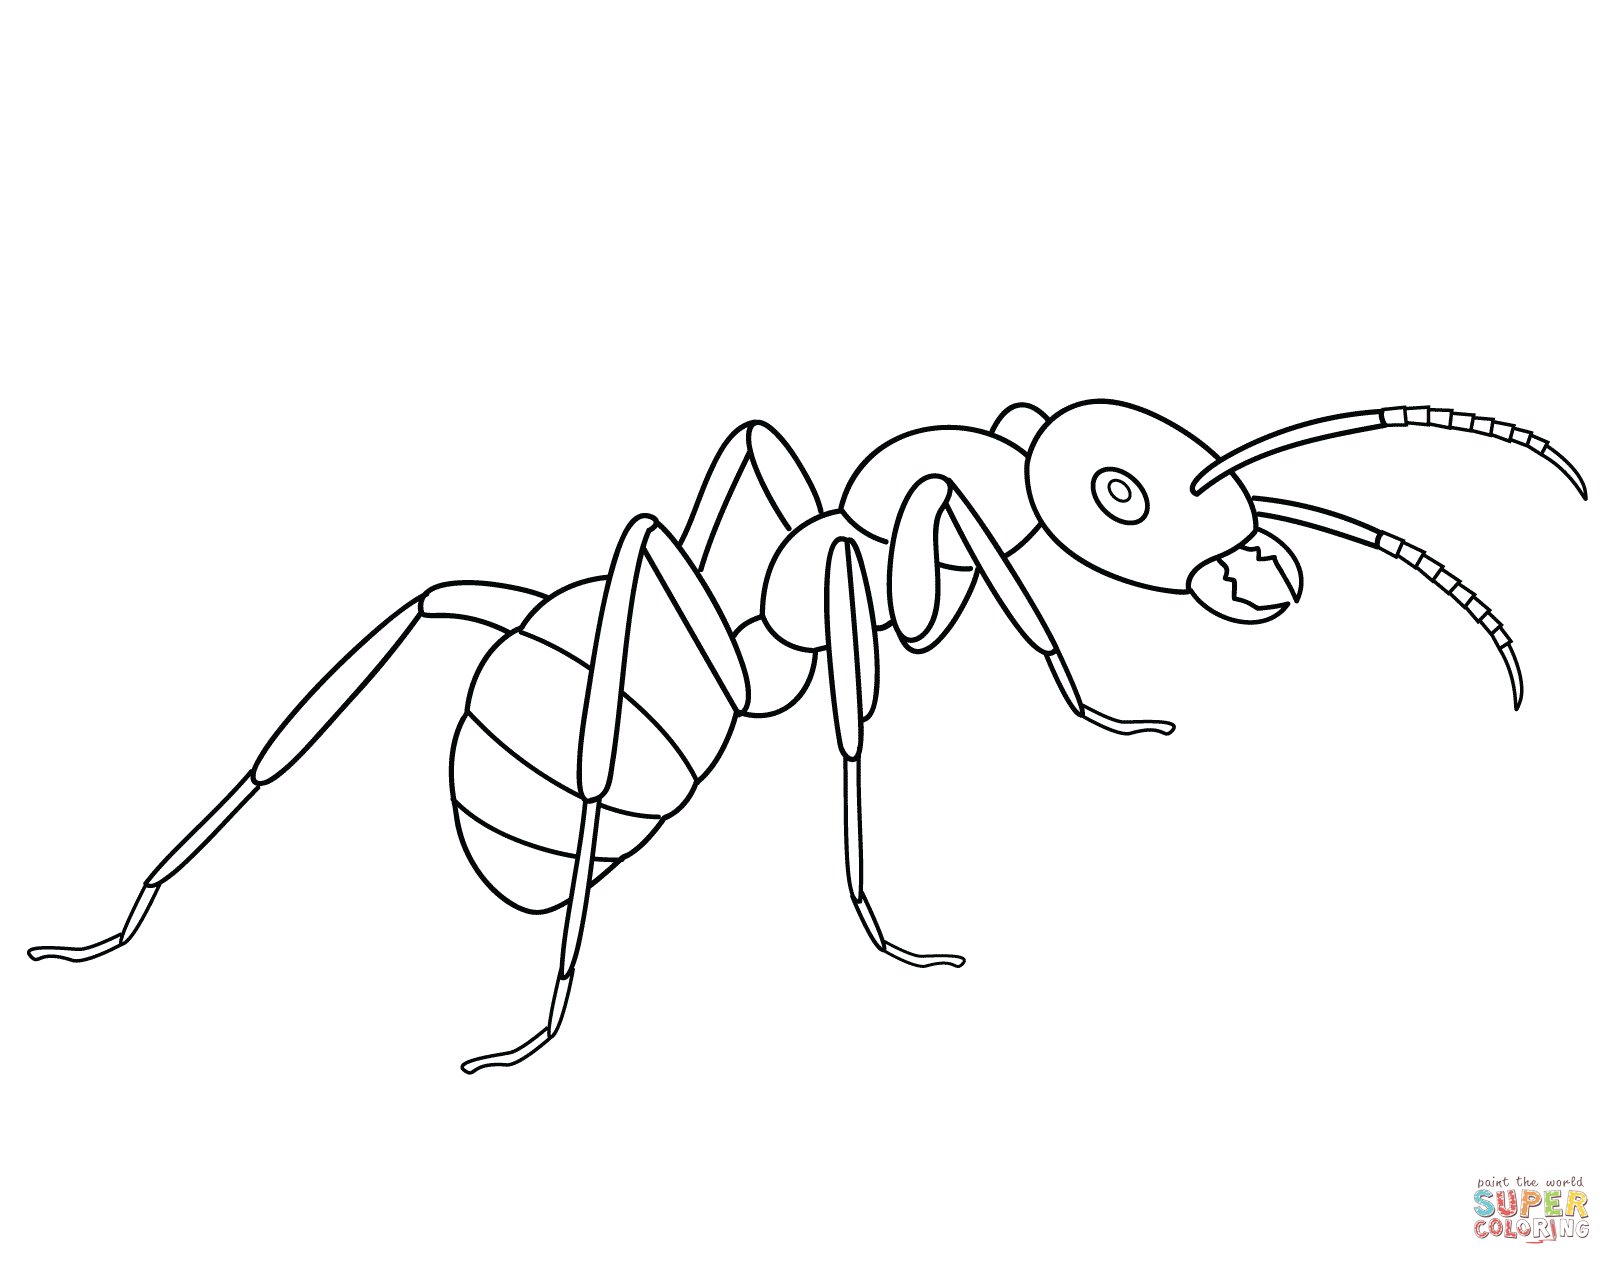 Ants coloring pages.